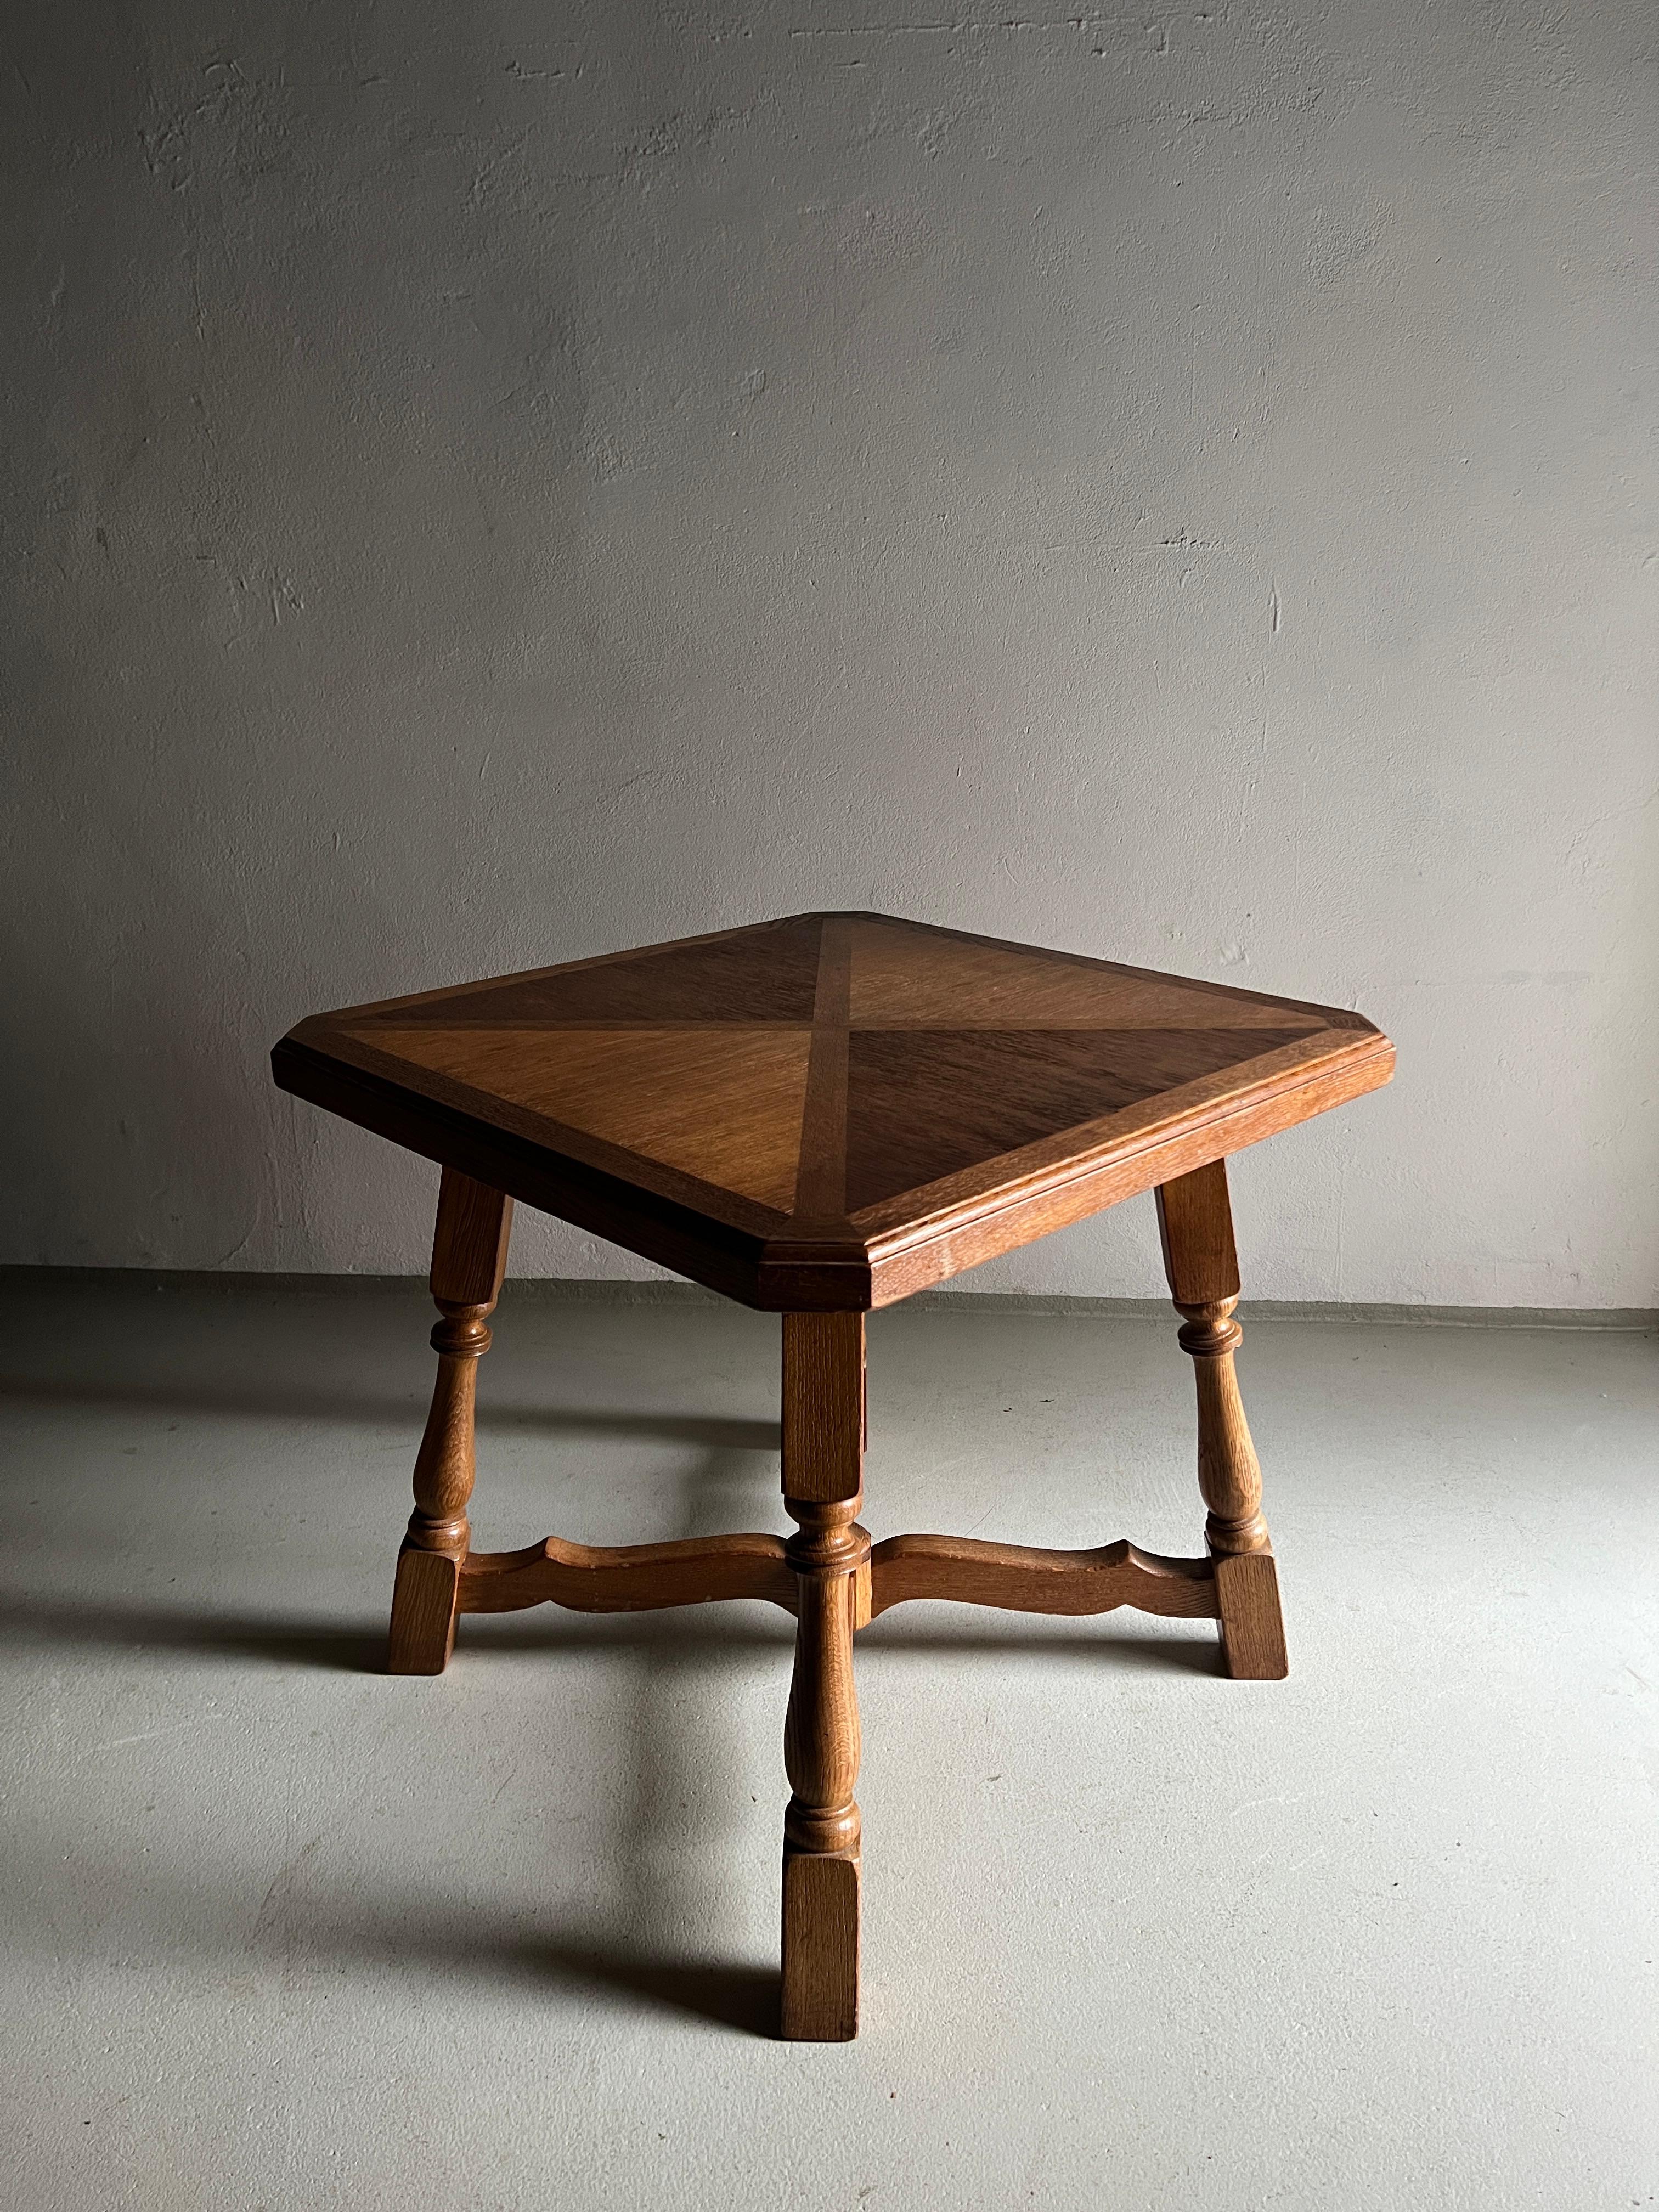 Vintage solid oak lamp table with a square tabletop.

Additional information:
Country of manufacture: The Netherlands
Period: Design period: 1970s
Dimensions: 72.5 W x 72.5 D x 67 H cm
Condition: Good vintage condition (some imperfections on the